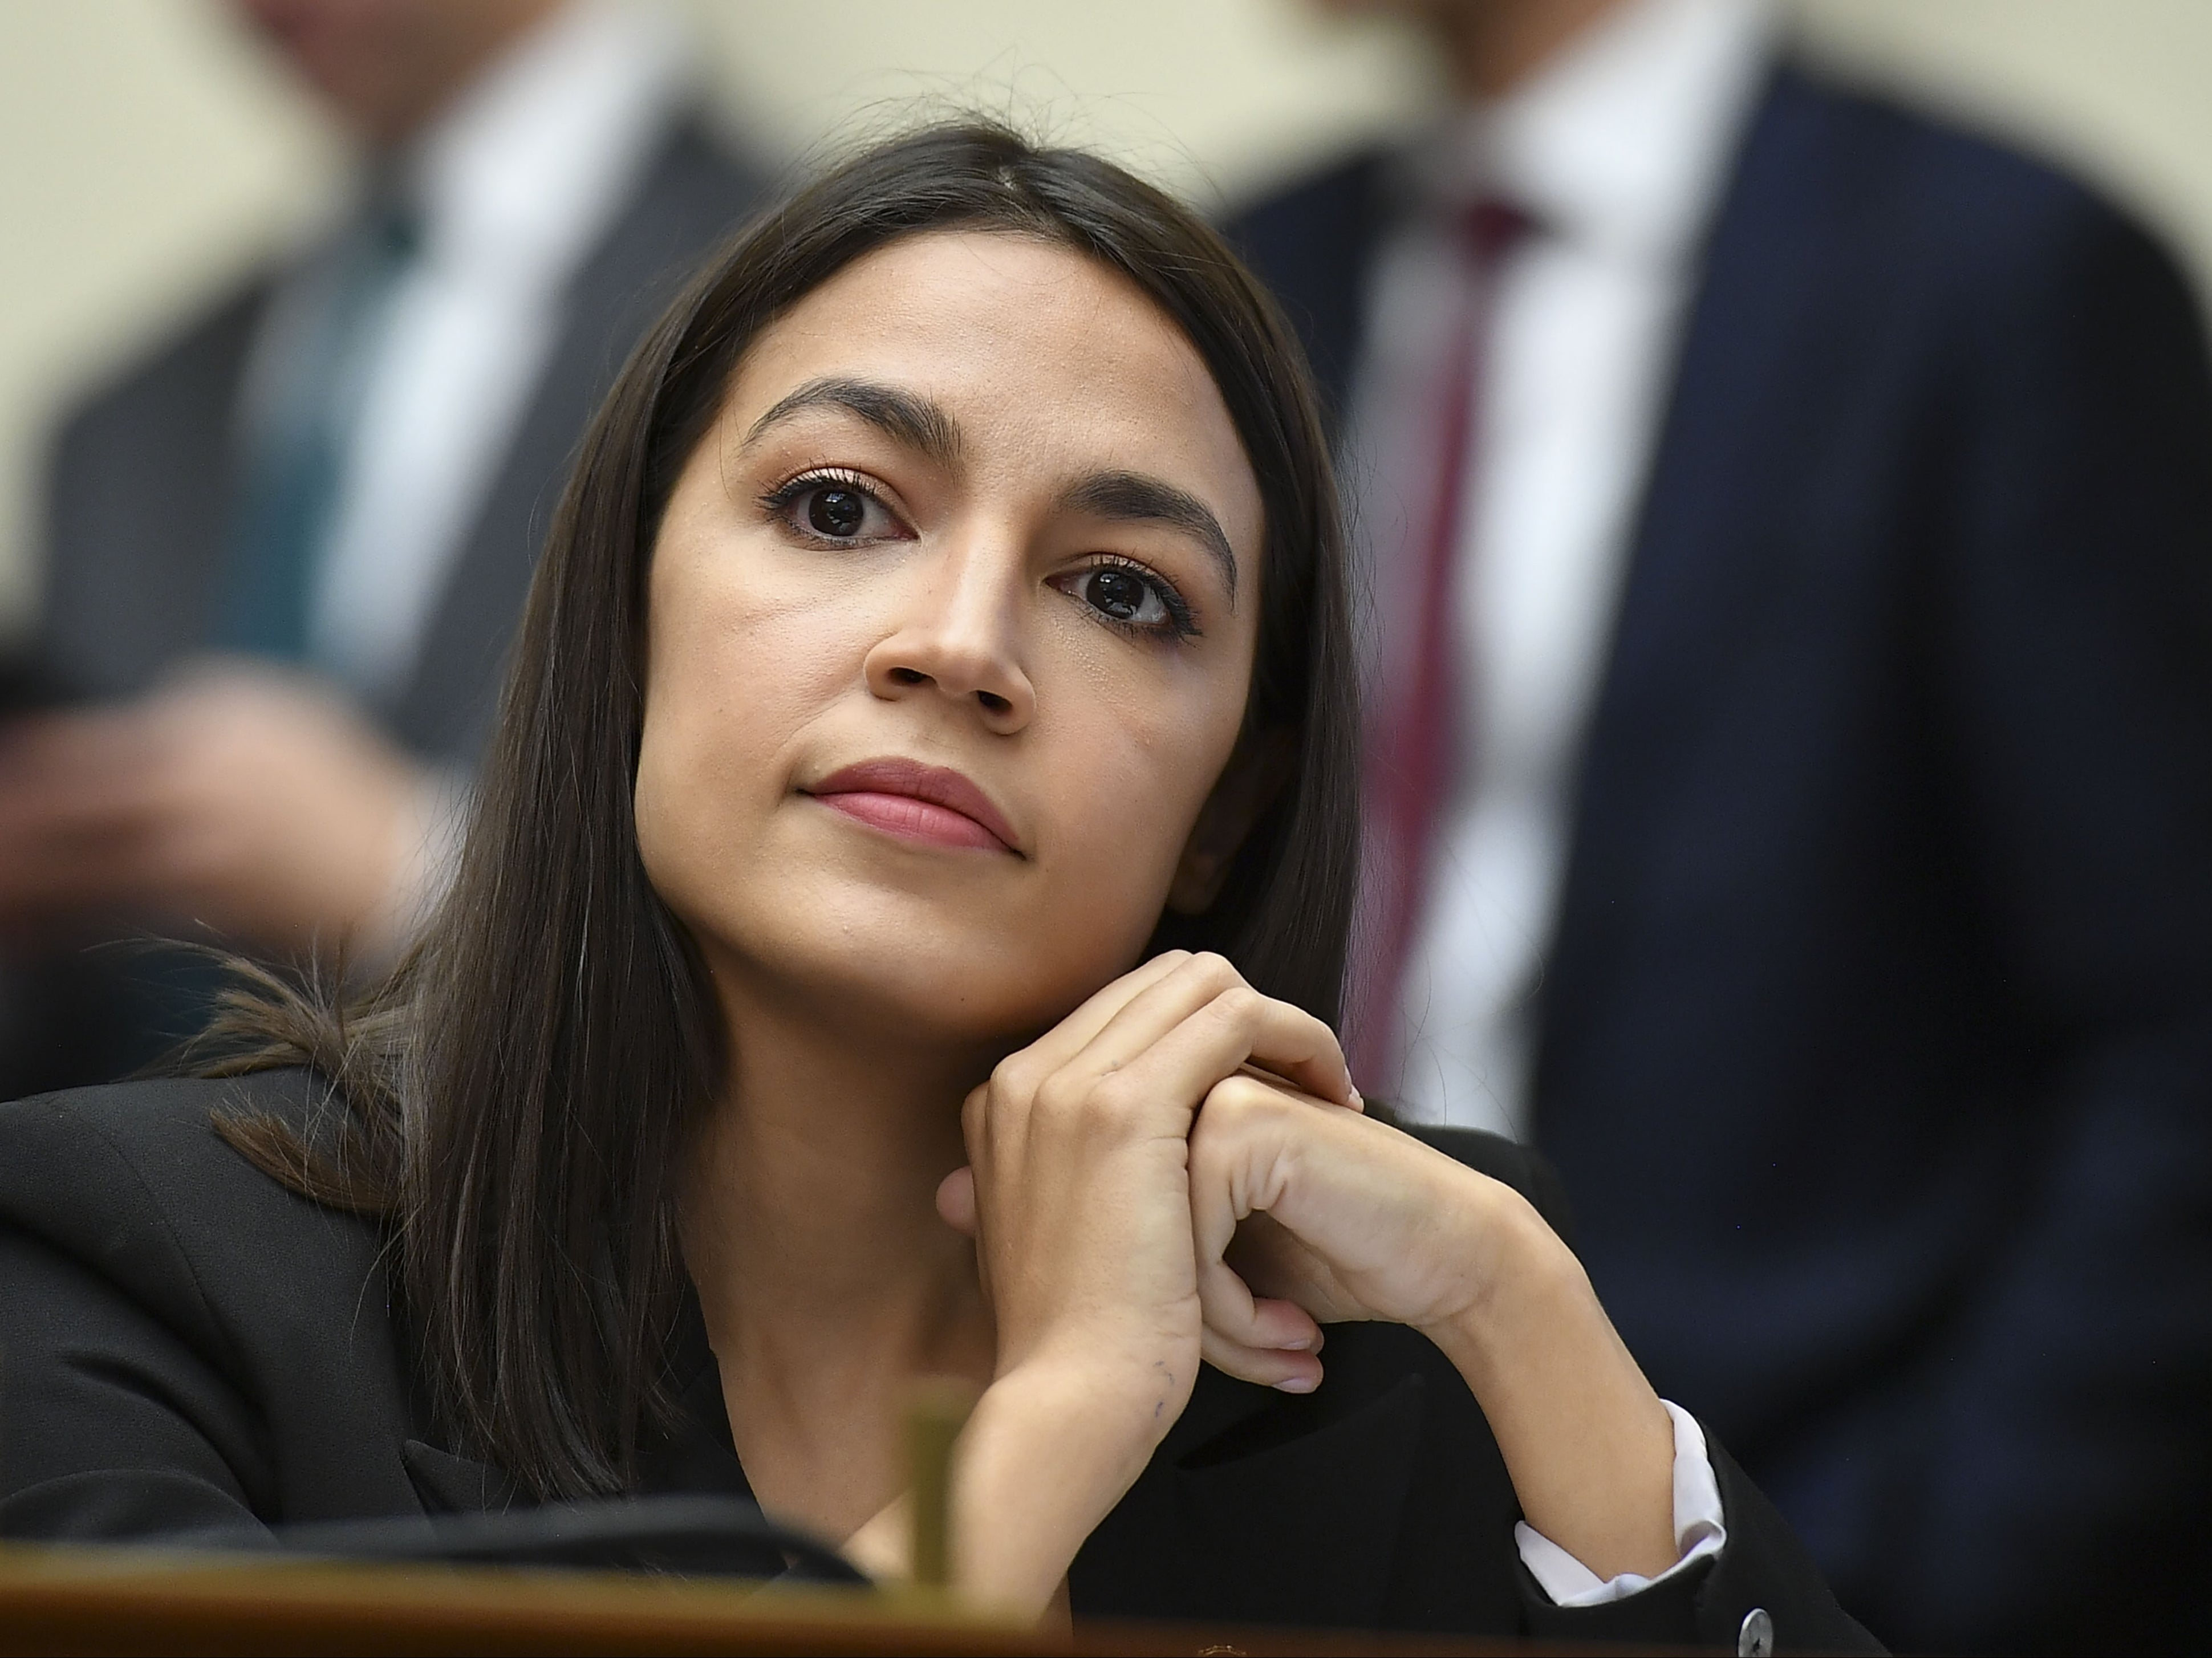 Alexandria Ocasio-Cortez says she is giving up meat for Lent in honour of Jamie Raskin’s late son